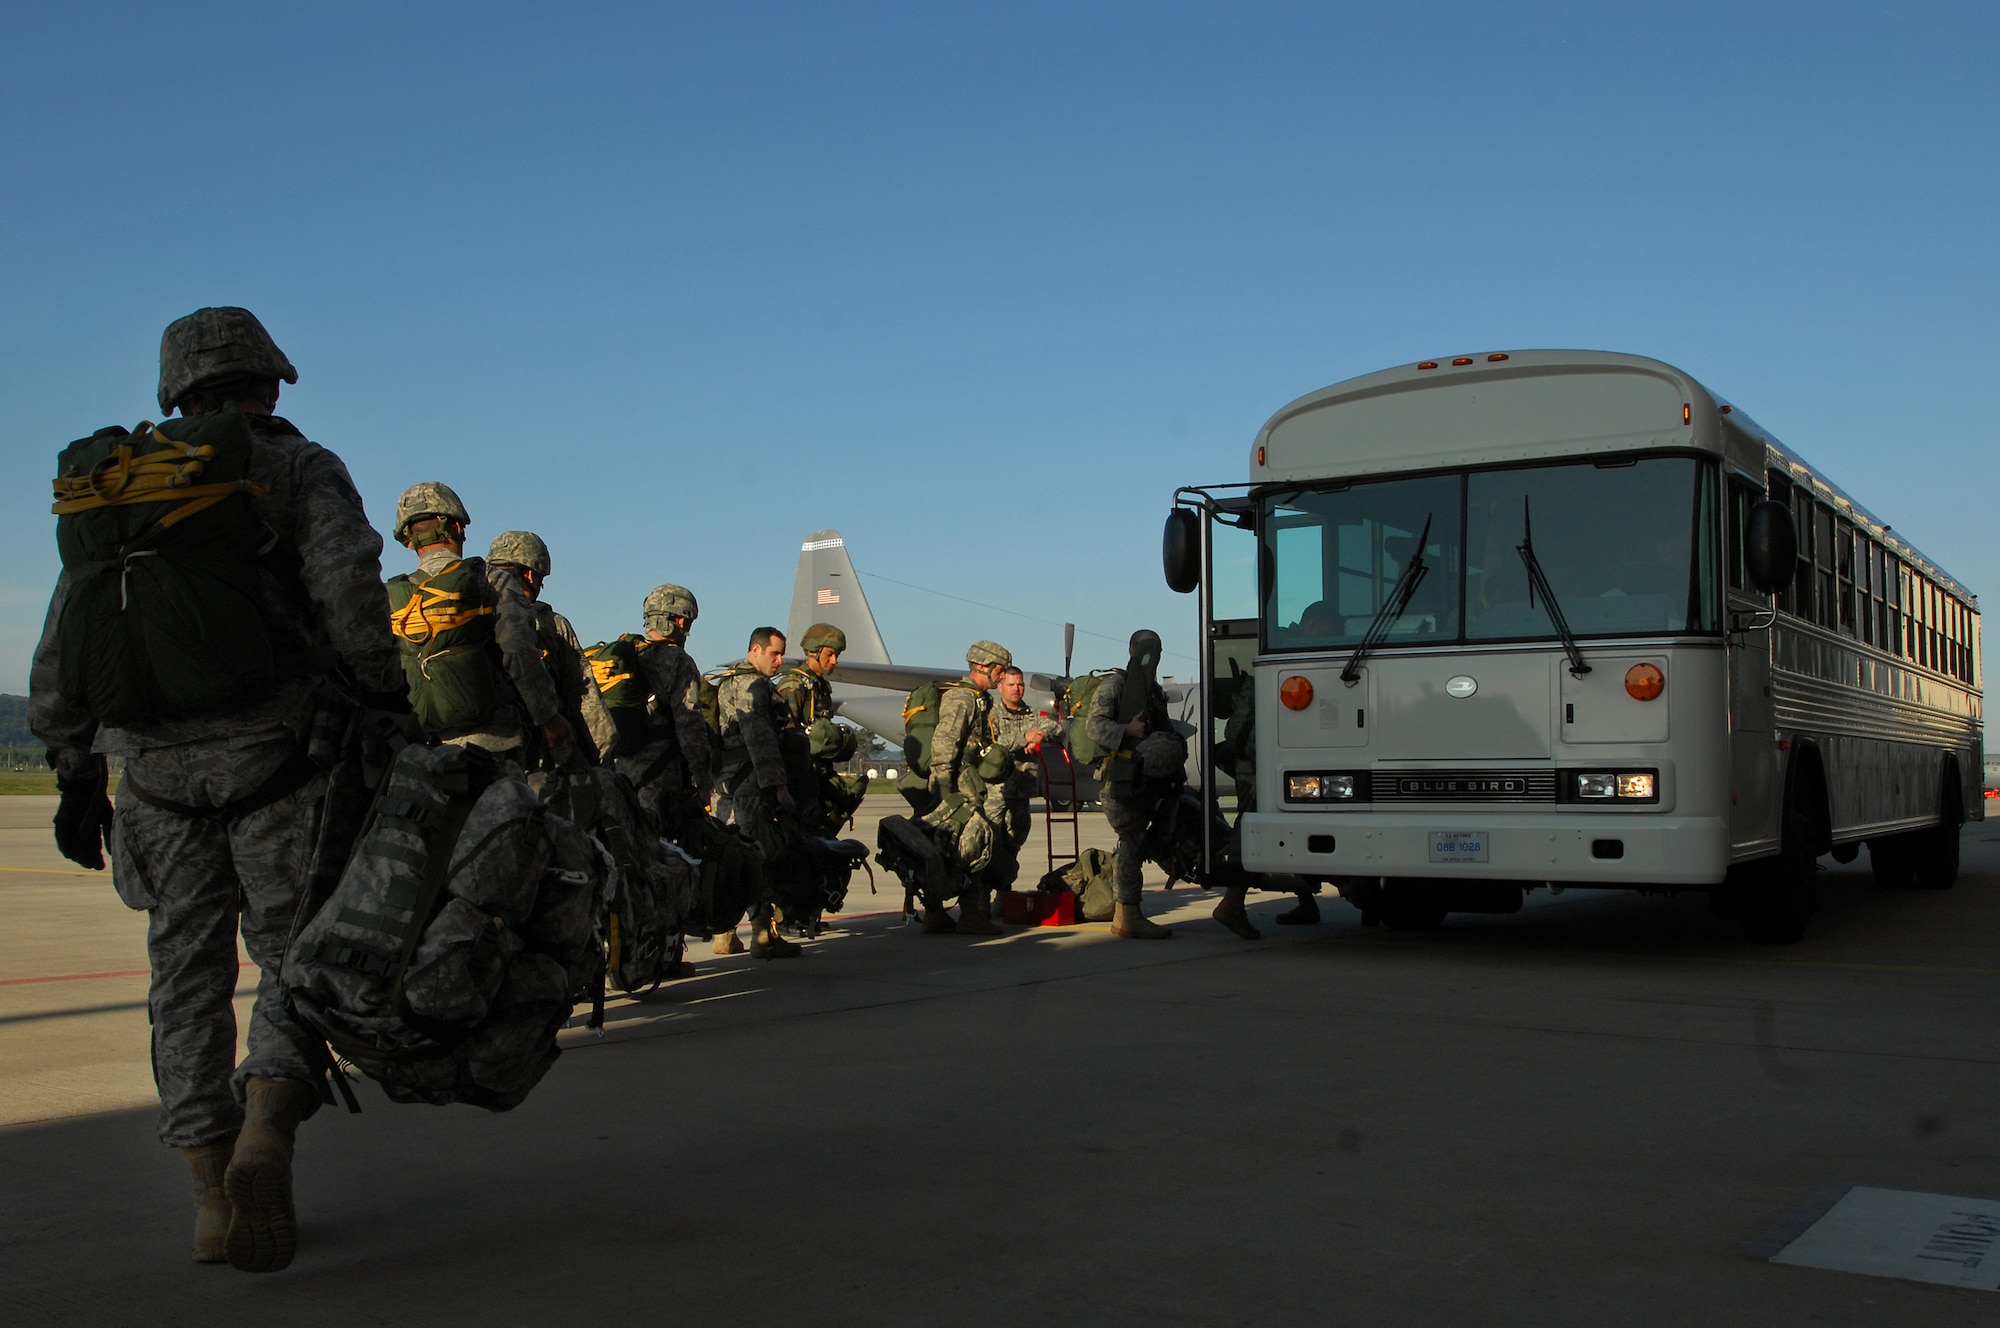 United States Air Force and Army paratroopers load a troop bus in preparation for the first C-130J Super Hercules personnel drop, May 4, 2009 Ramstein Air Base, Germany. (U.S. Air Force photo by Senior Airman Kenny Holston)
 
